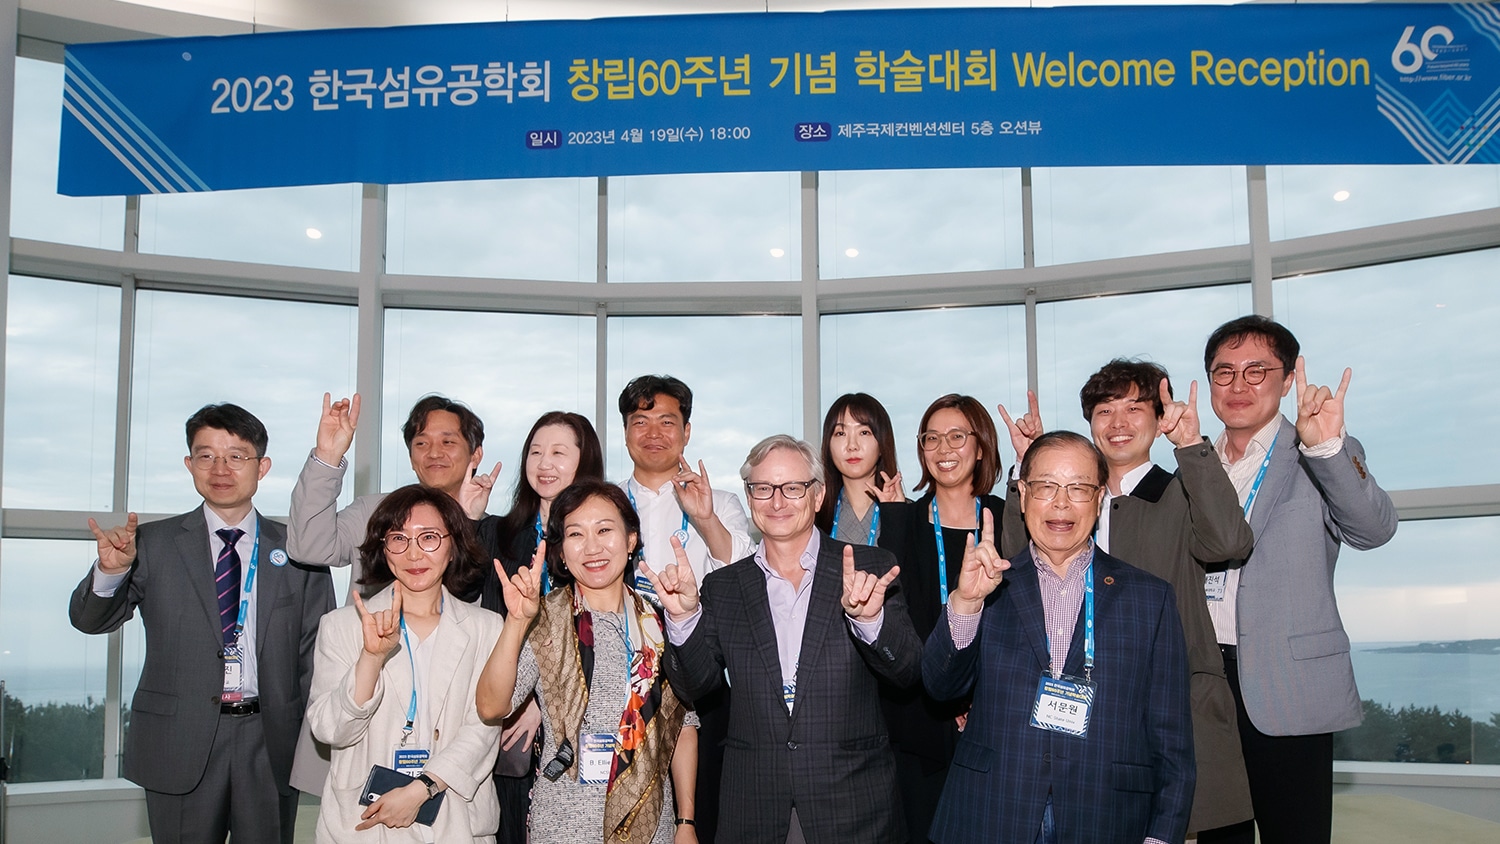 David Hinks, center, with attendees of the Korean Fiber Society’s 60th Anniversary Conference